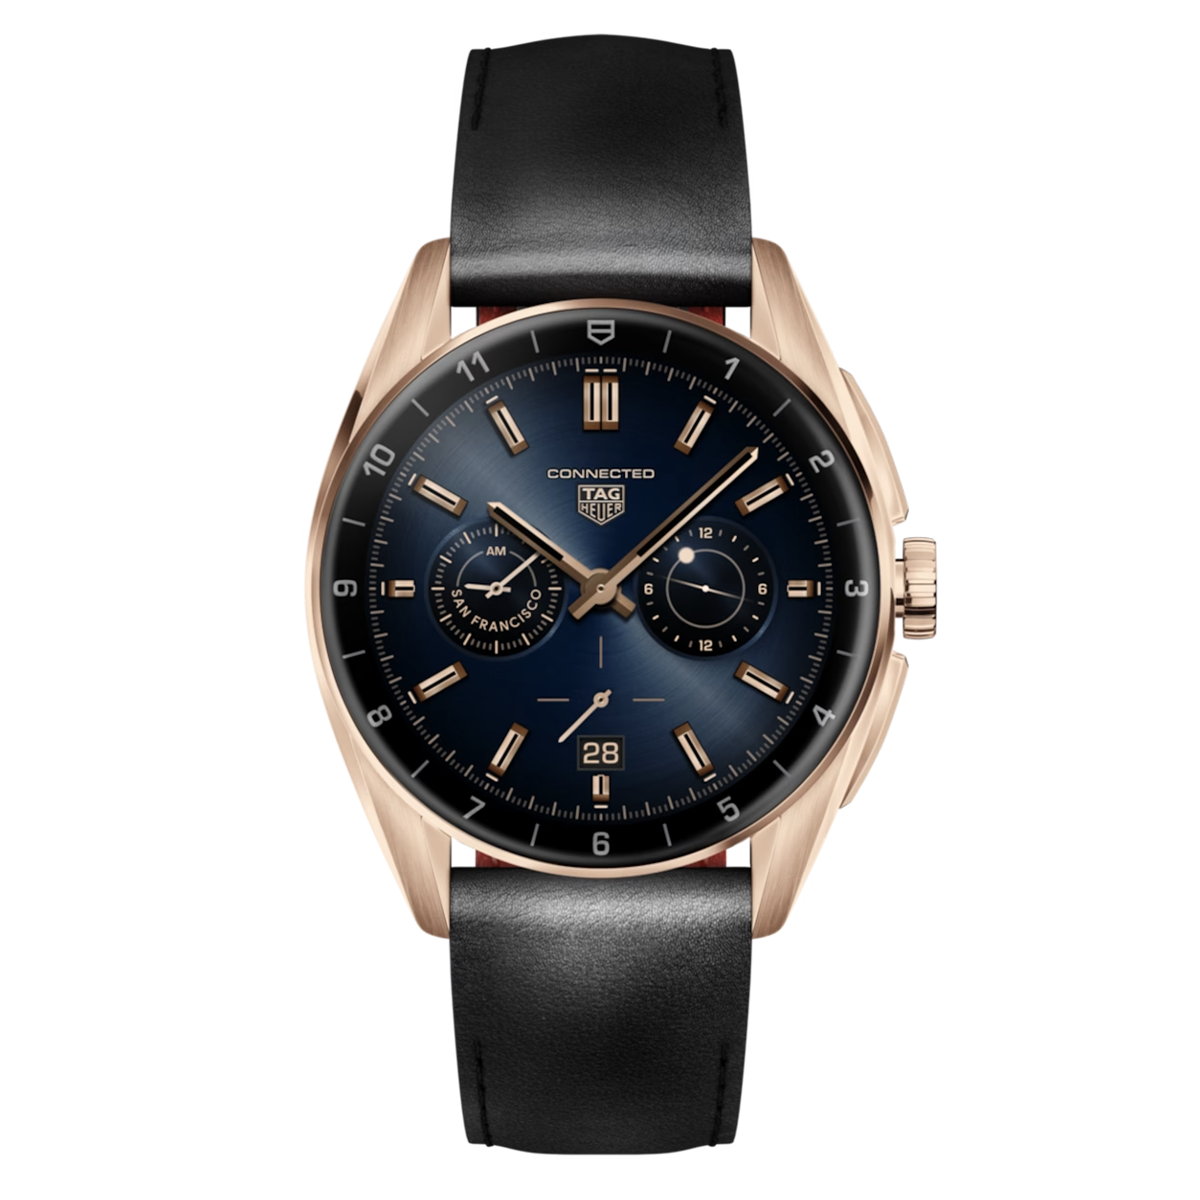 Смарт-годинник TAG HEUER CONNECTED Calibre E4 Golden Bright Edition - 42 mm Rose Golden PVD Steel (SBR8011.BC6652)